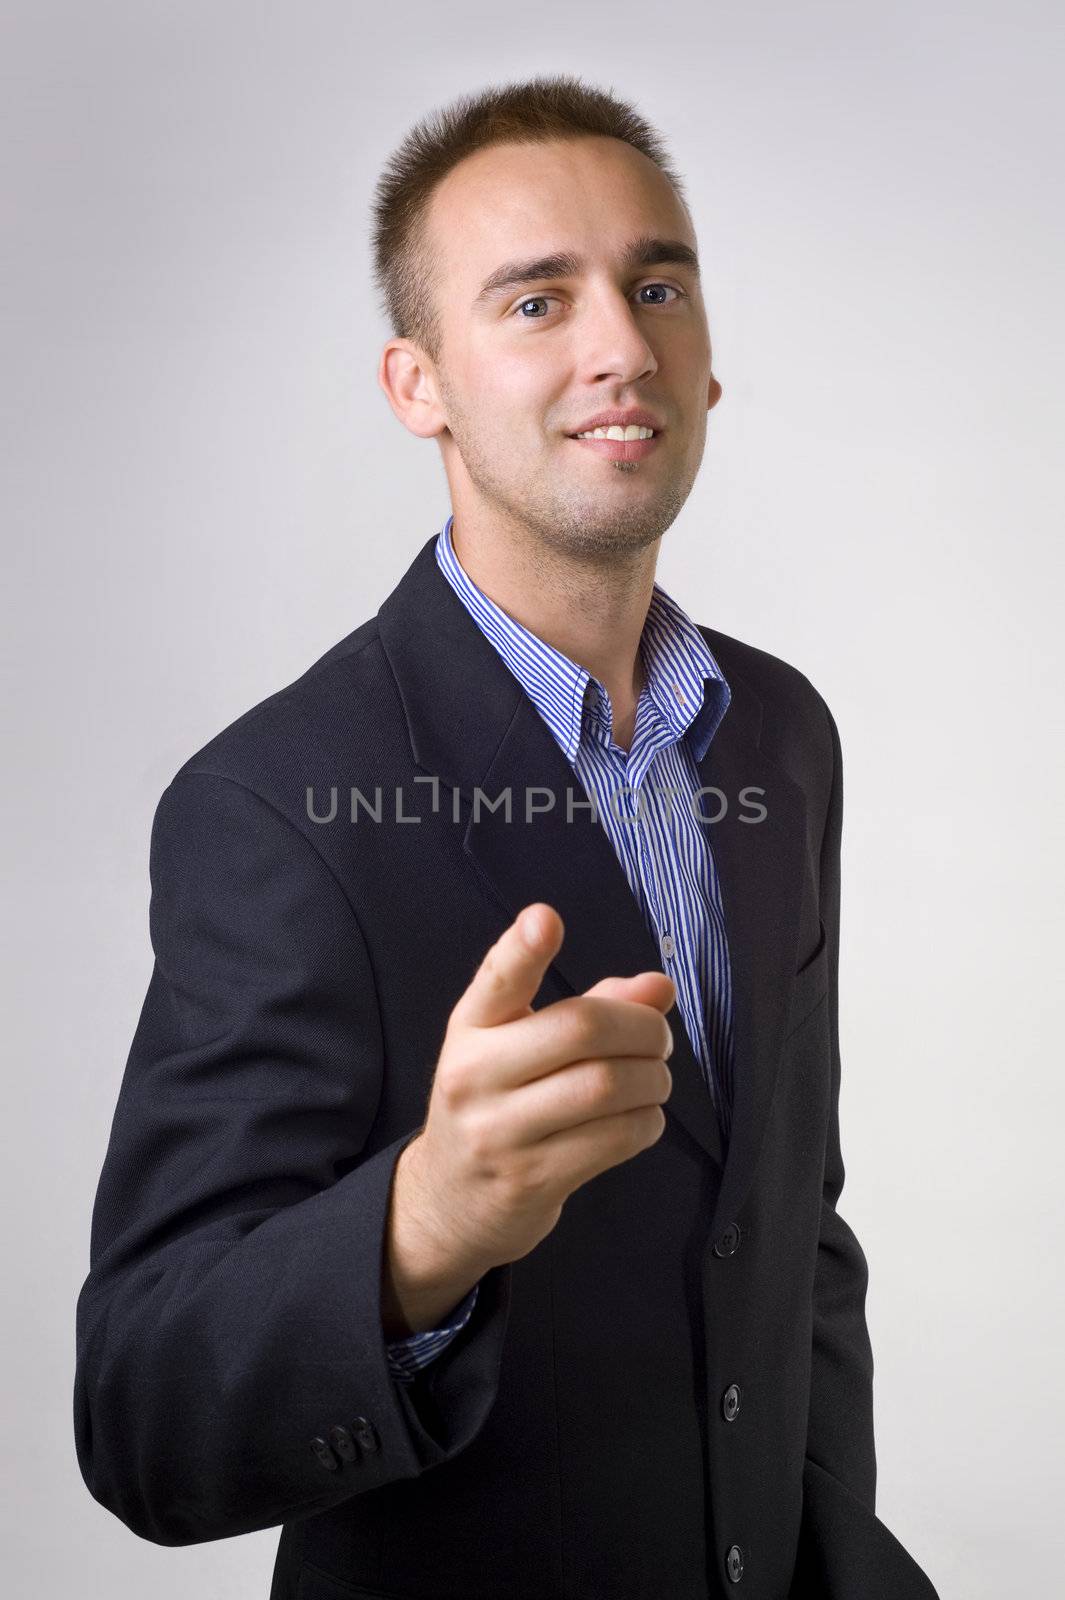 young male smiling bussinesman pointing his finger at you